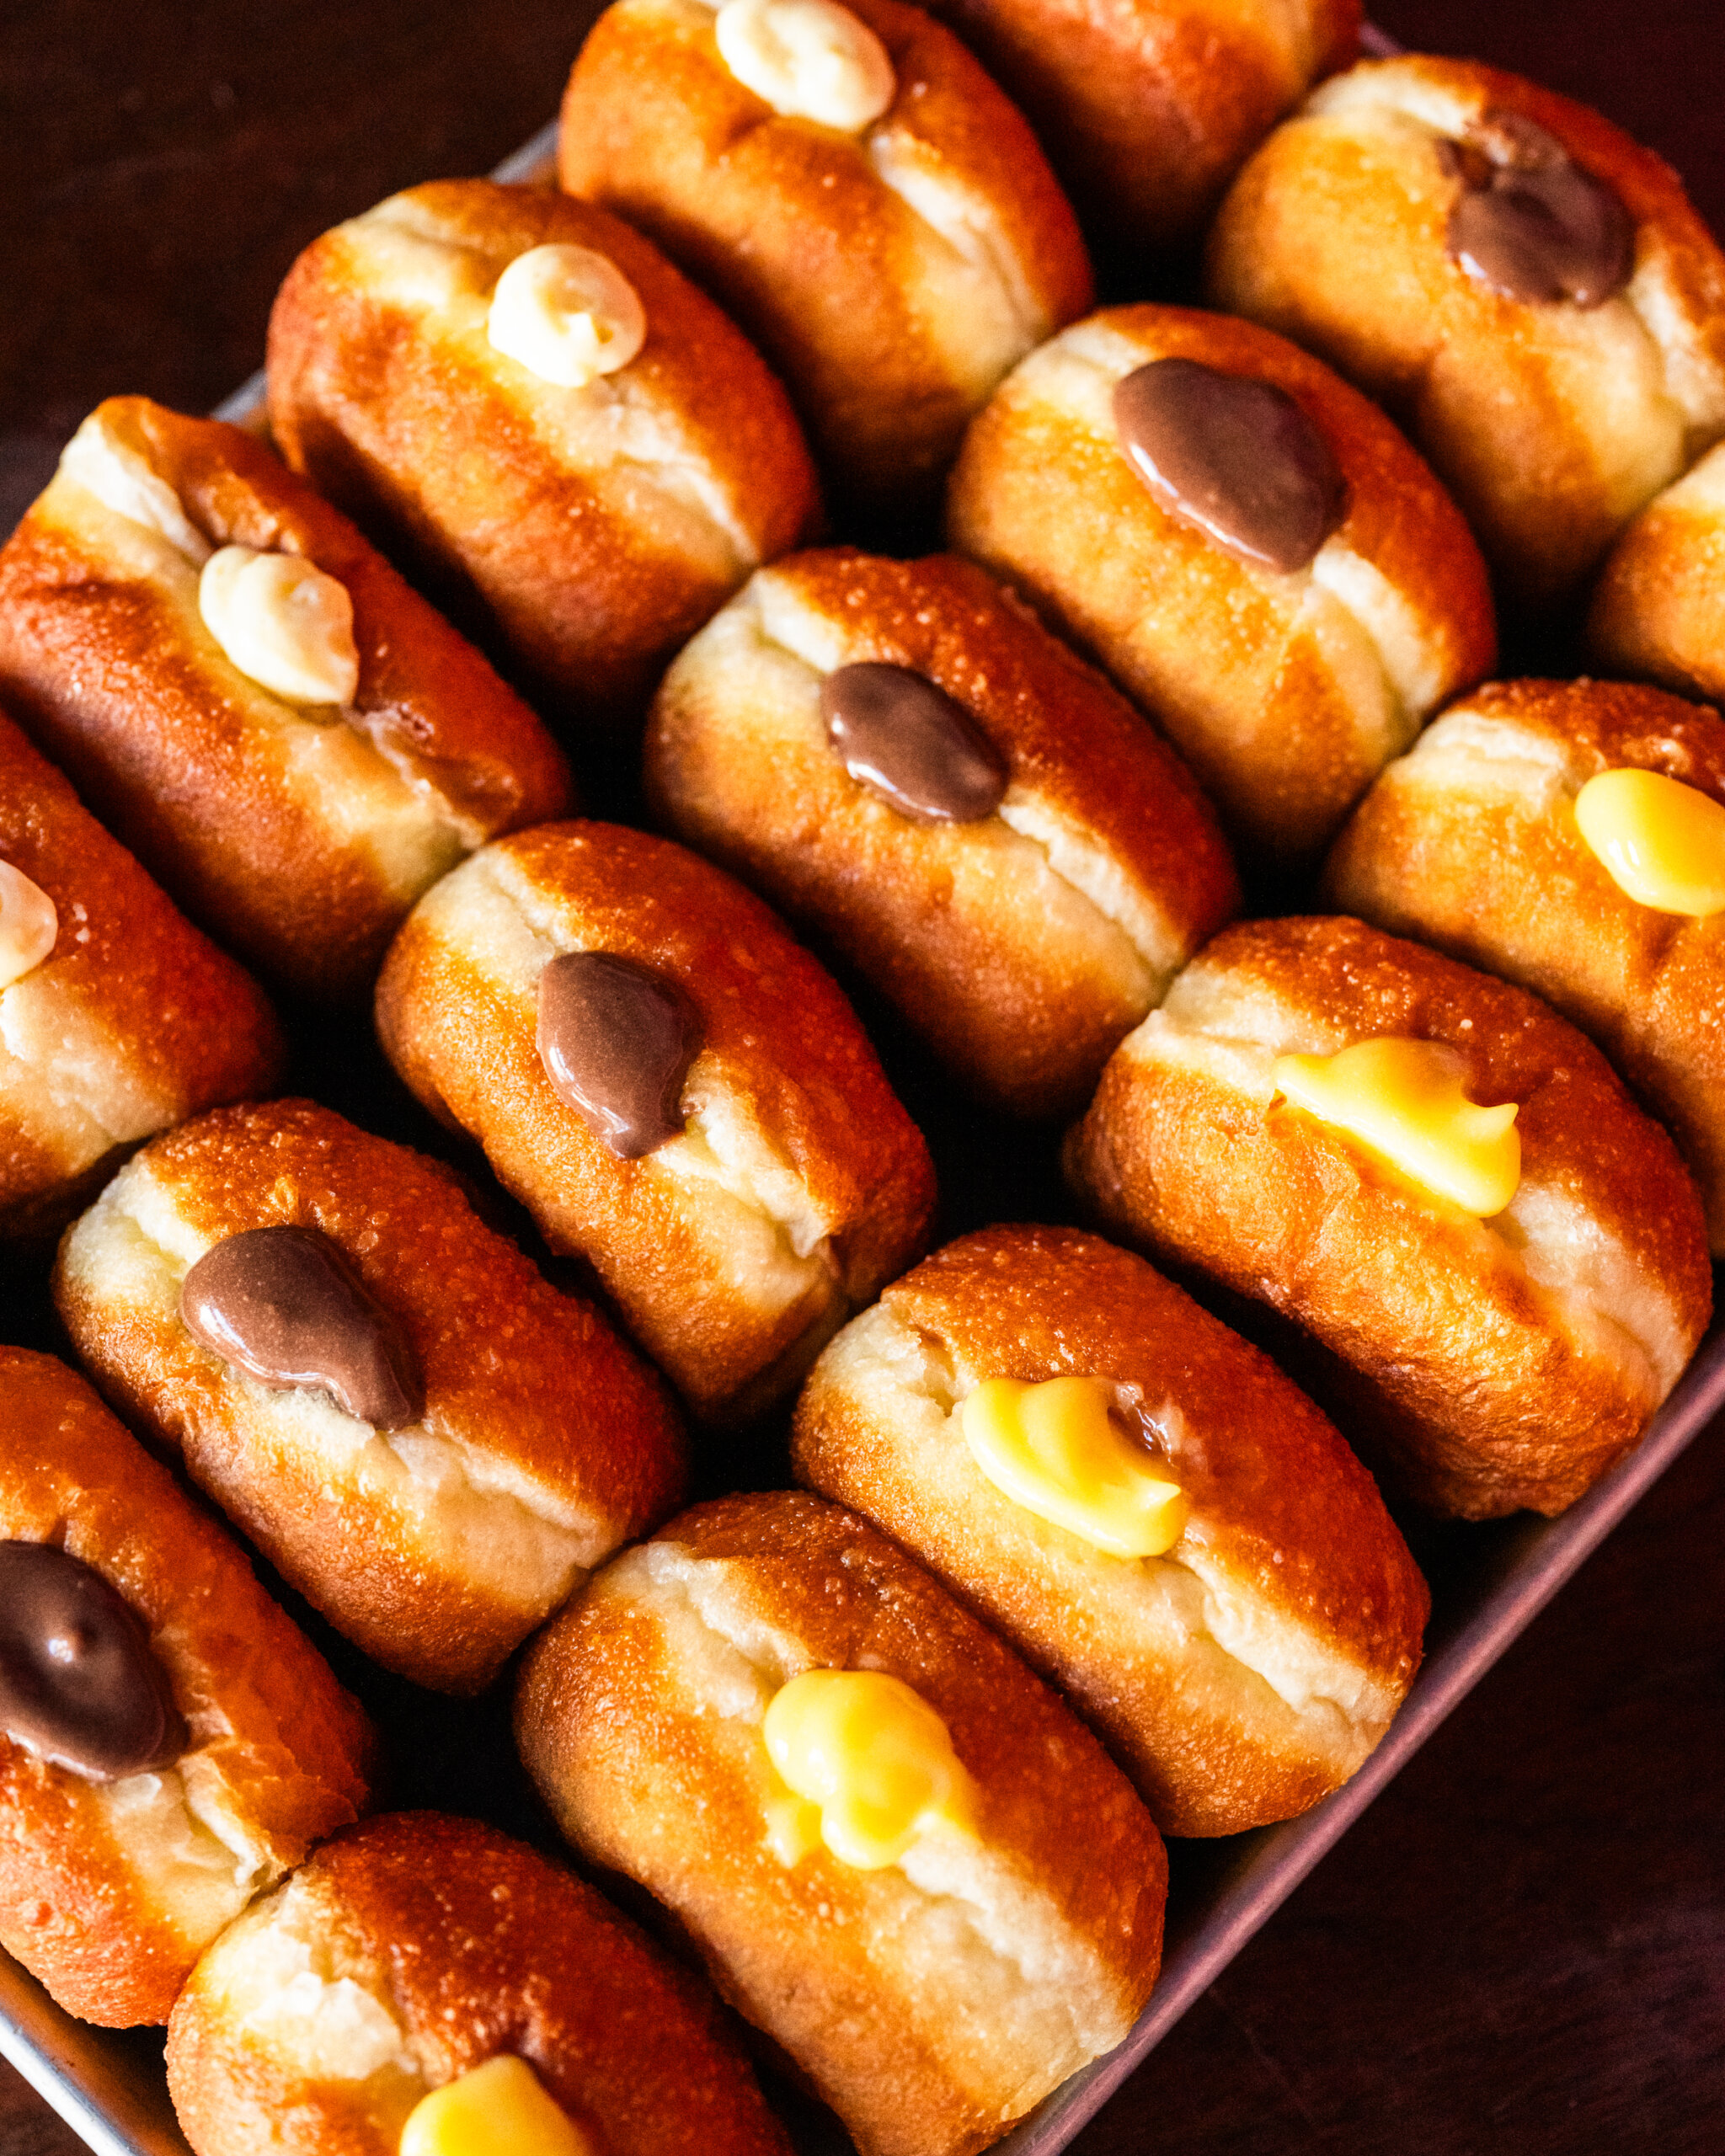 Jelly-filled brioche donuts from Paw Paw's in New Orleans